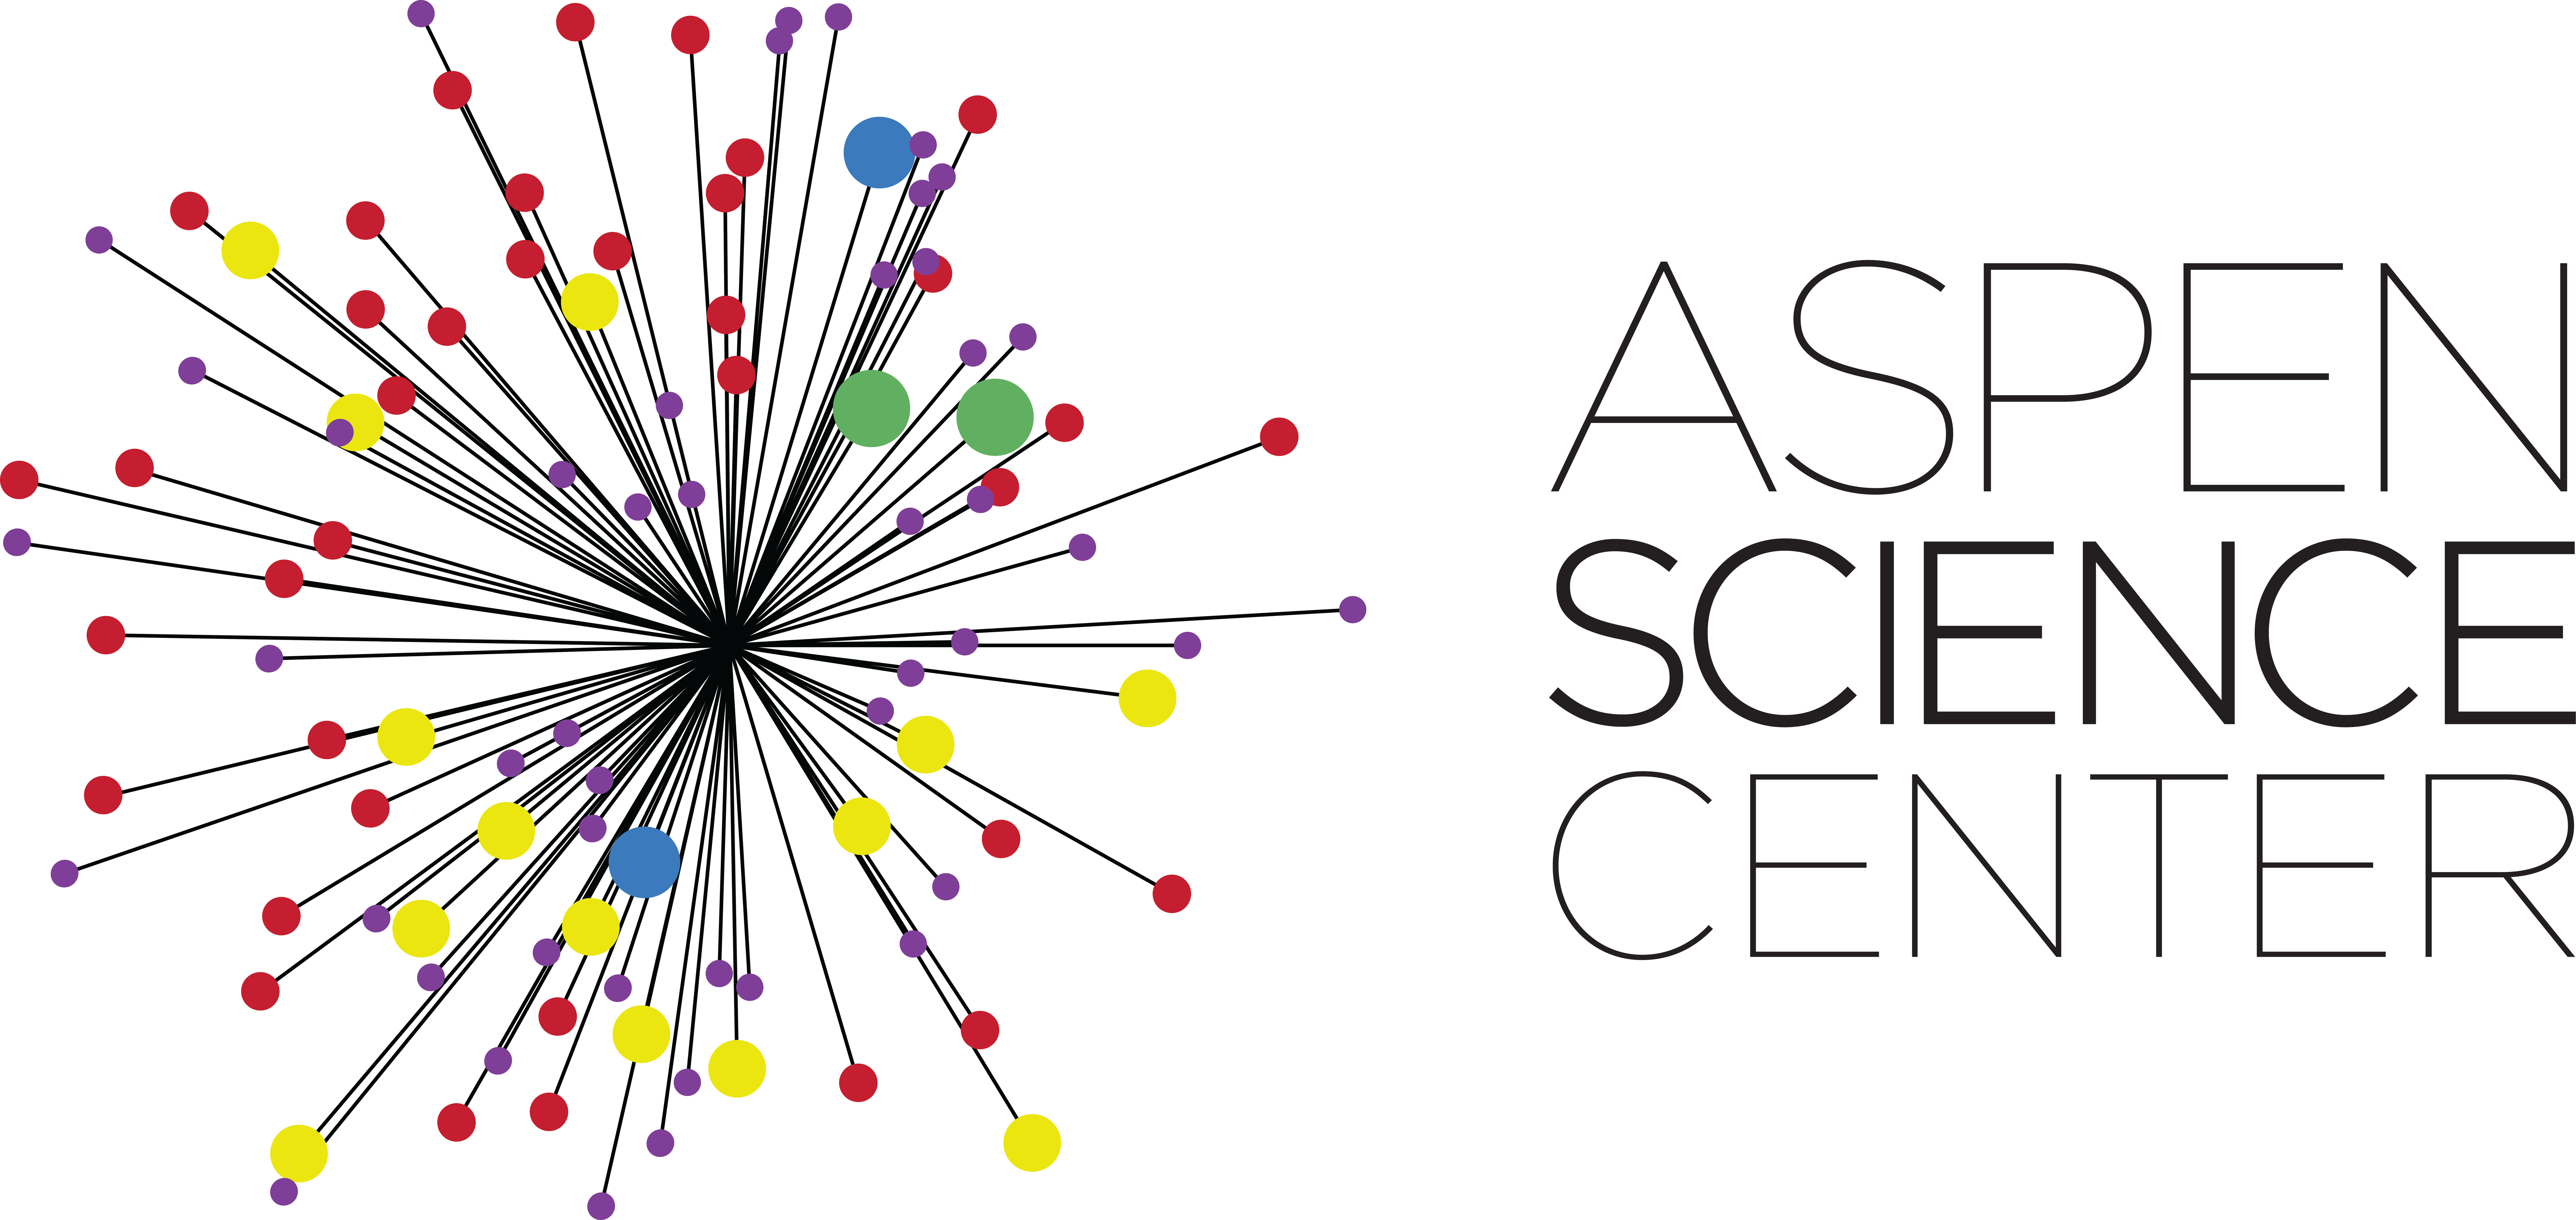 Aspen Science Center logo with the words aspen science center next to a colorful icon of circles shooting off from a single point